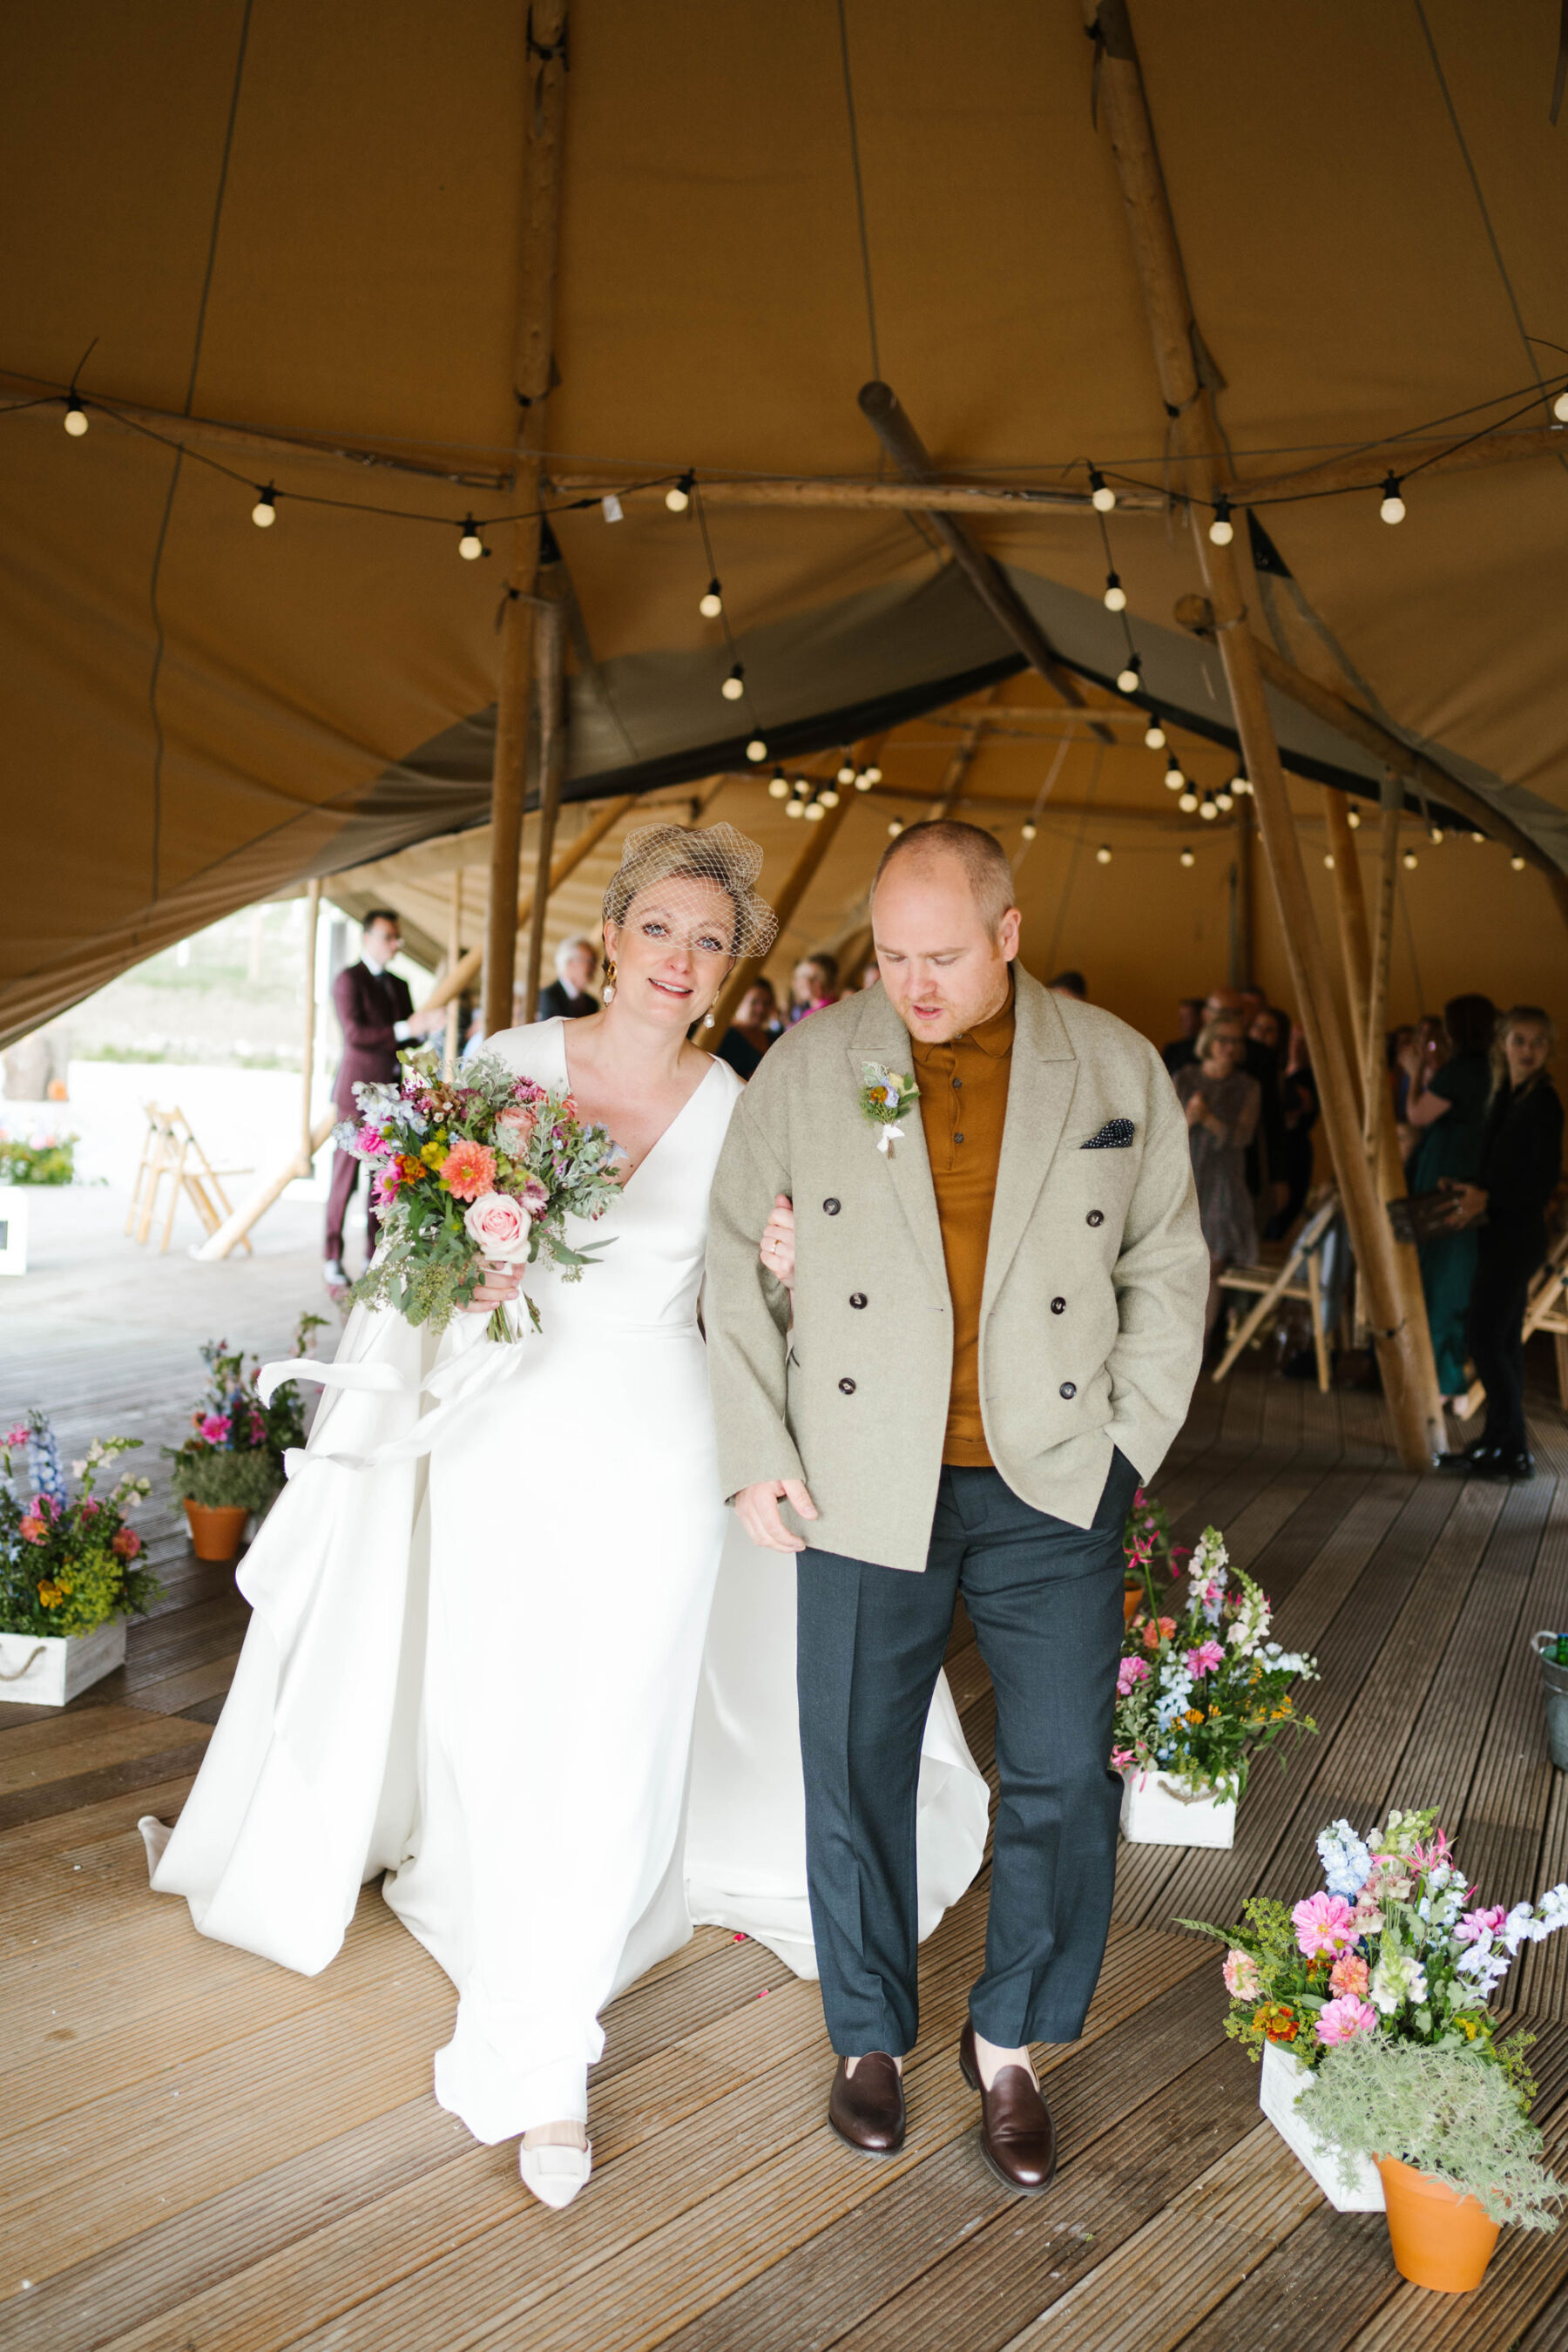 Teepee wedding at Wilderness Reserve Suffolk. Bride wears Andrea Hawkes.